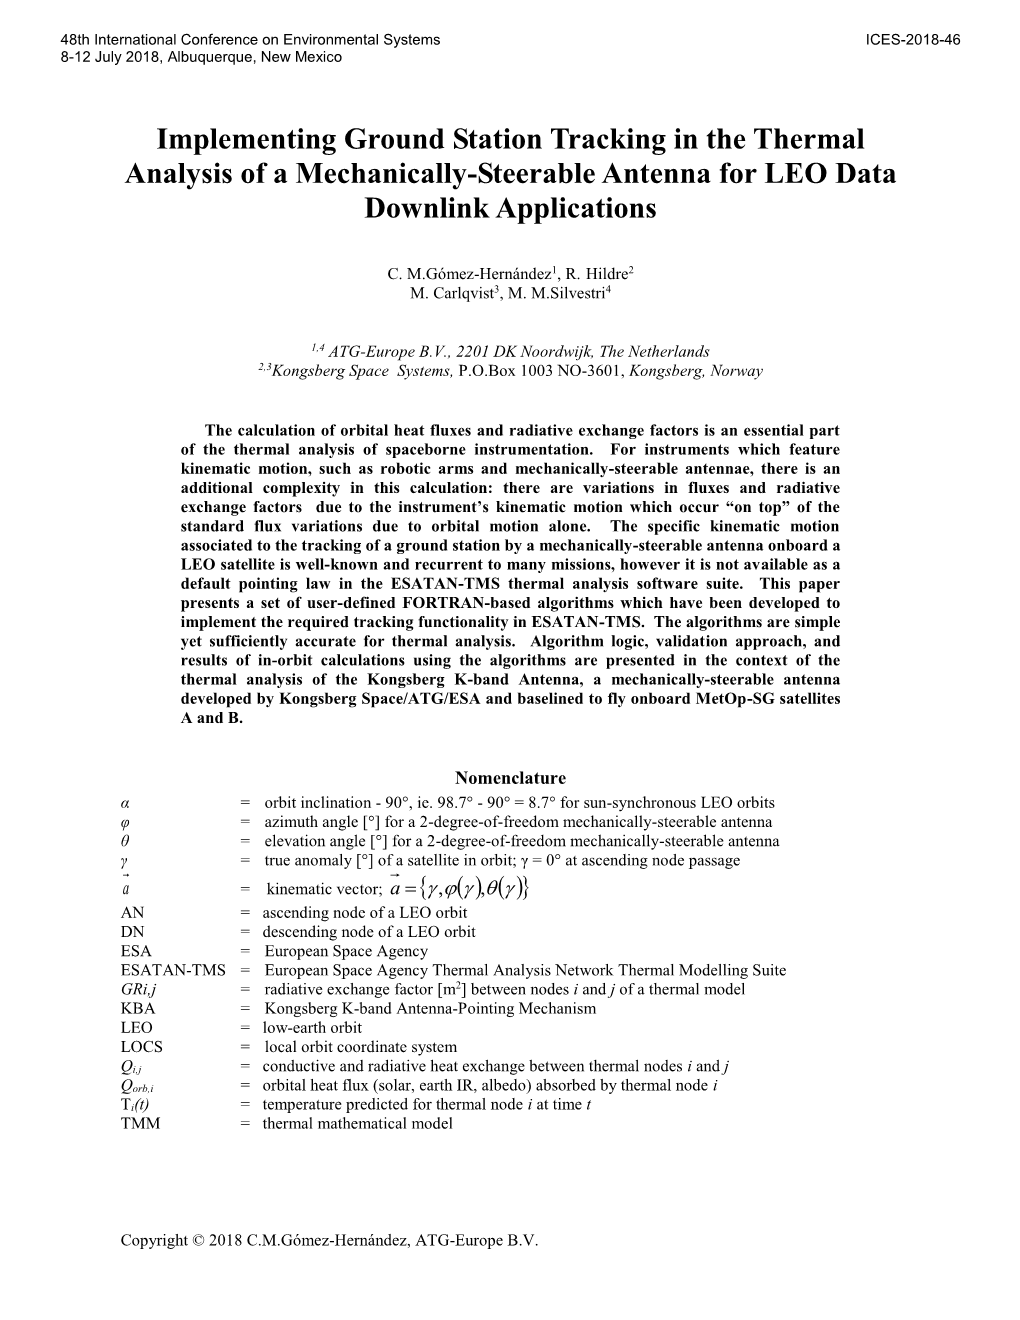 Implementing Ground Station Tracking in the Thermal Analysis of a Mechanically-Steerable Antenna for LEO Data Downlink Applications